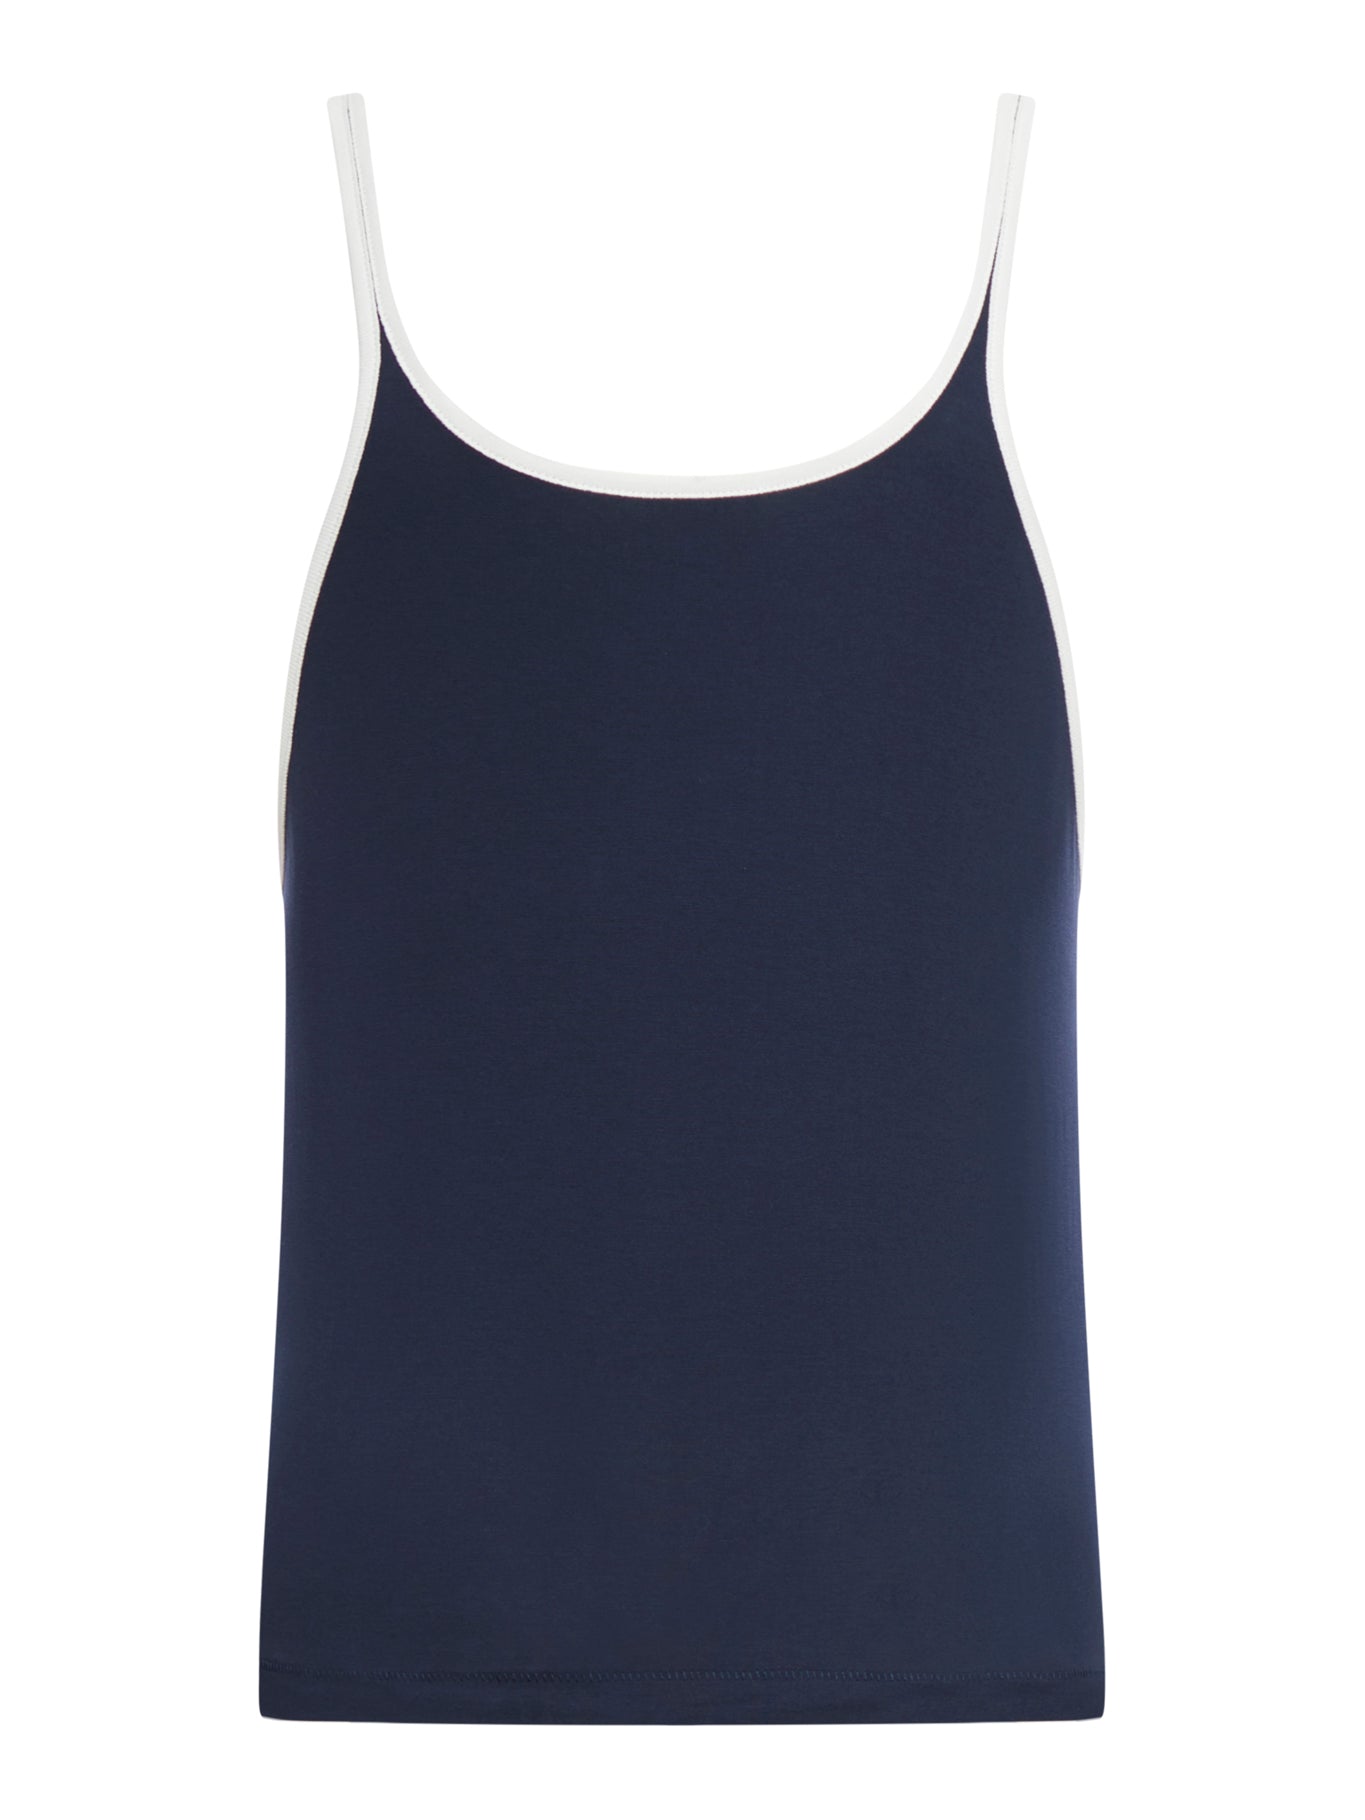 tank top with logo